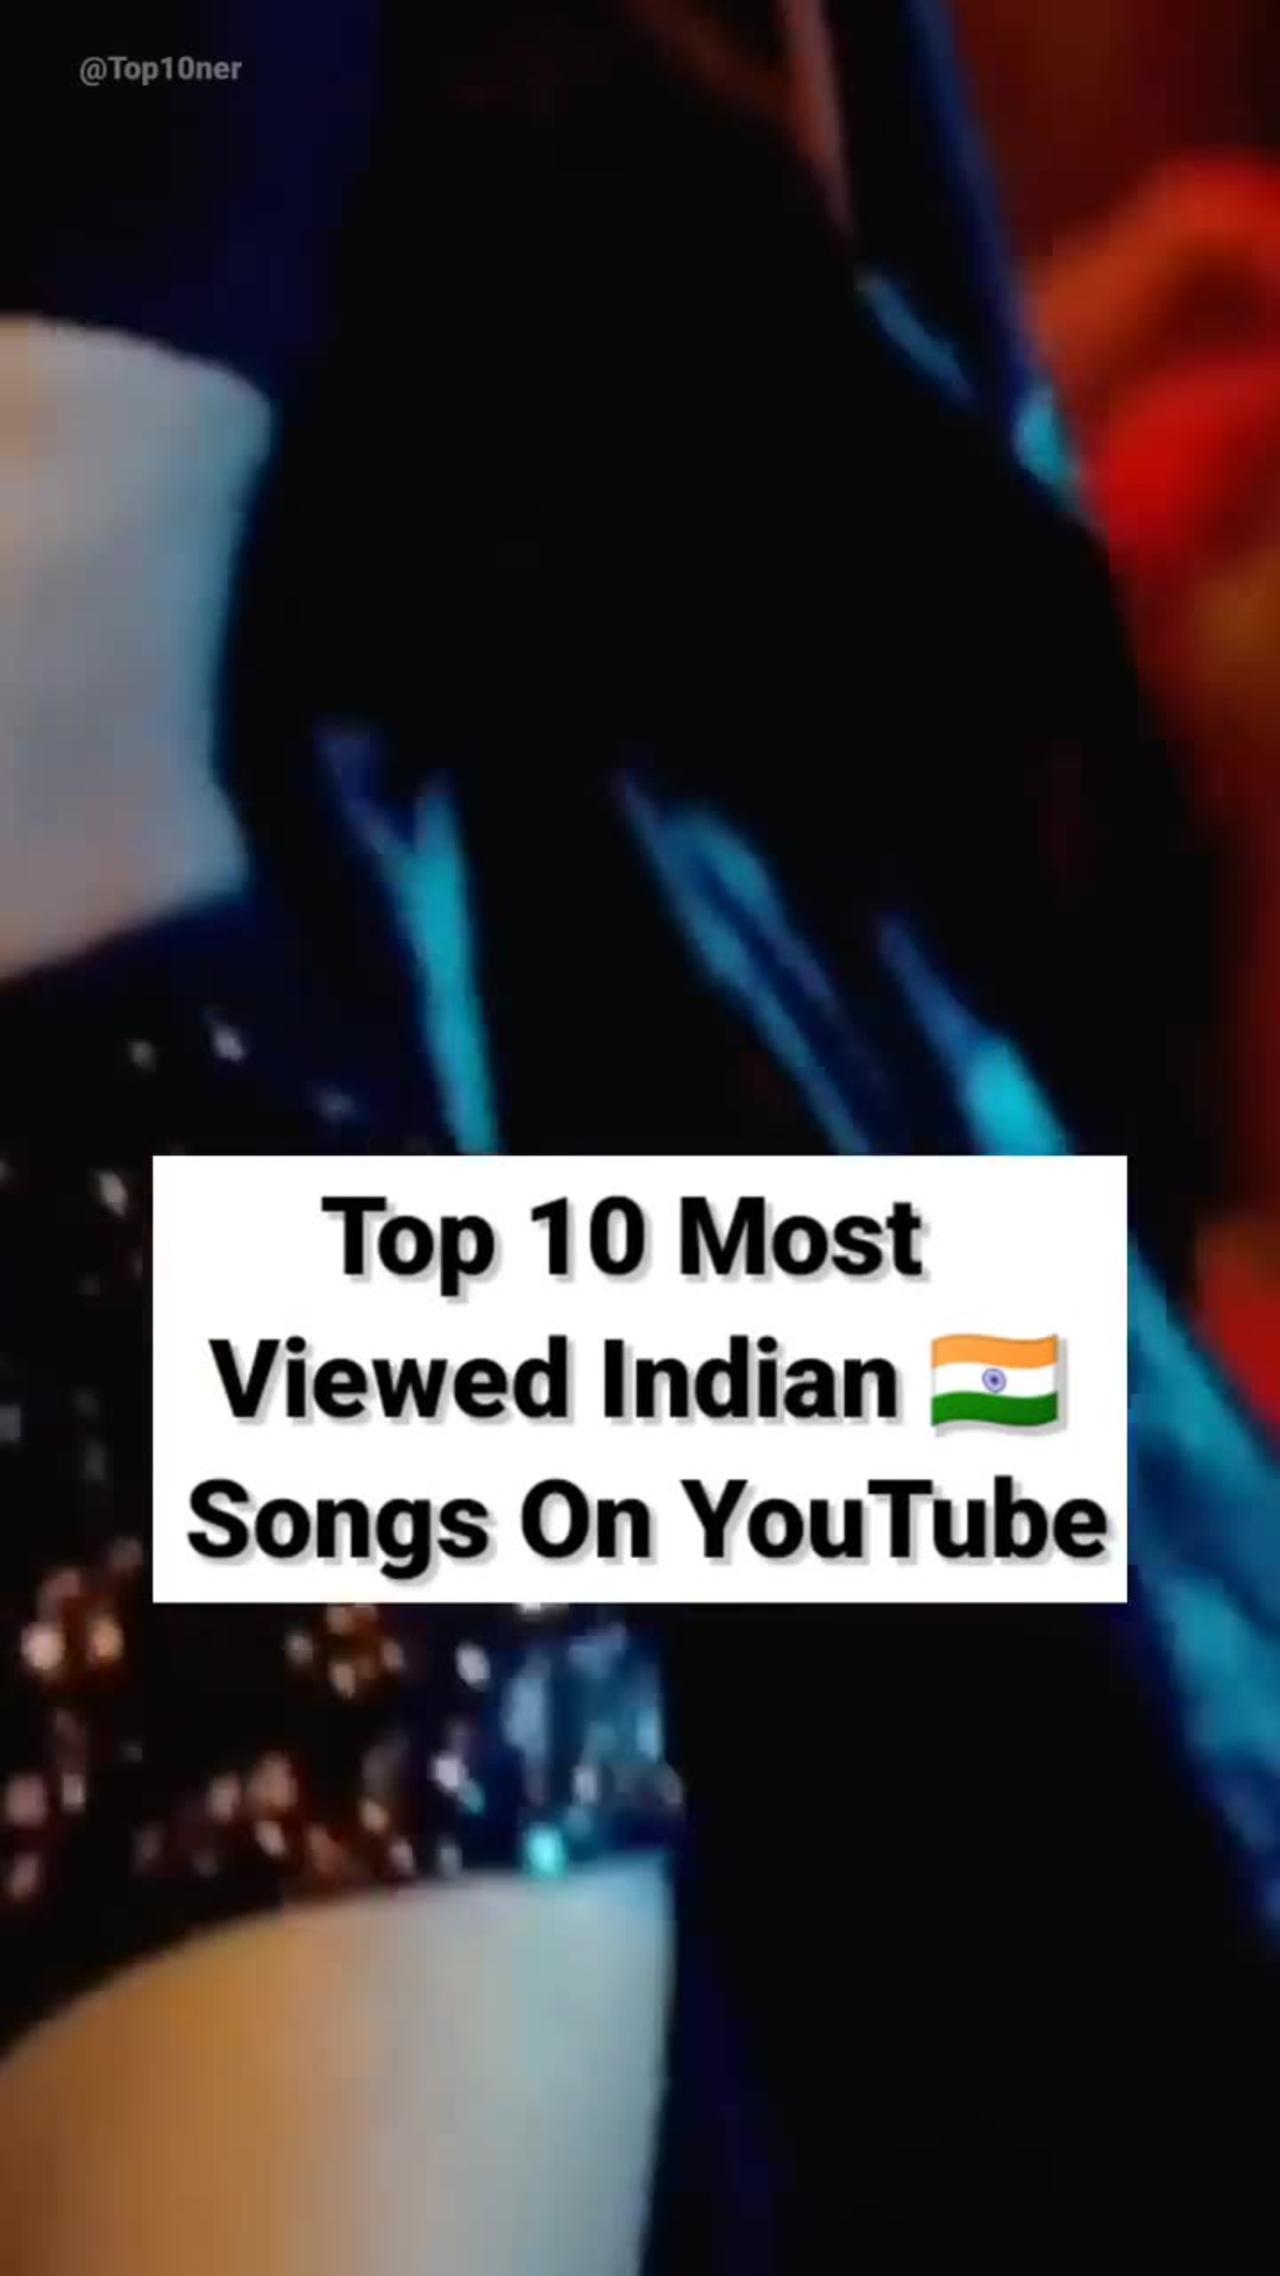 🤔Top 10 Most Viewed 🇮🇳 Indian Songs On YouTube #shorts #top10ner